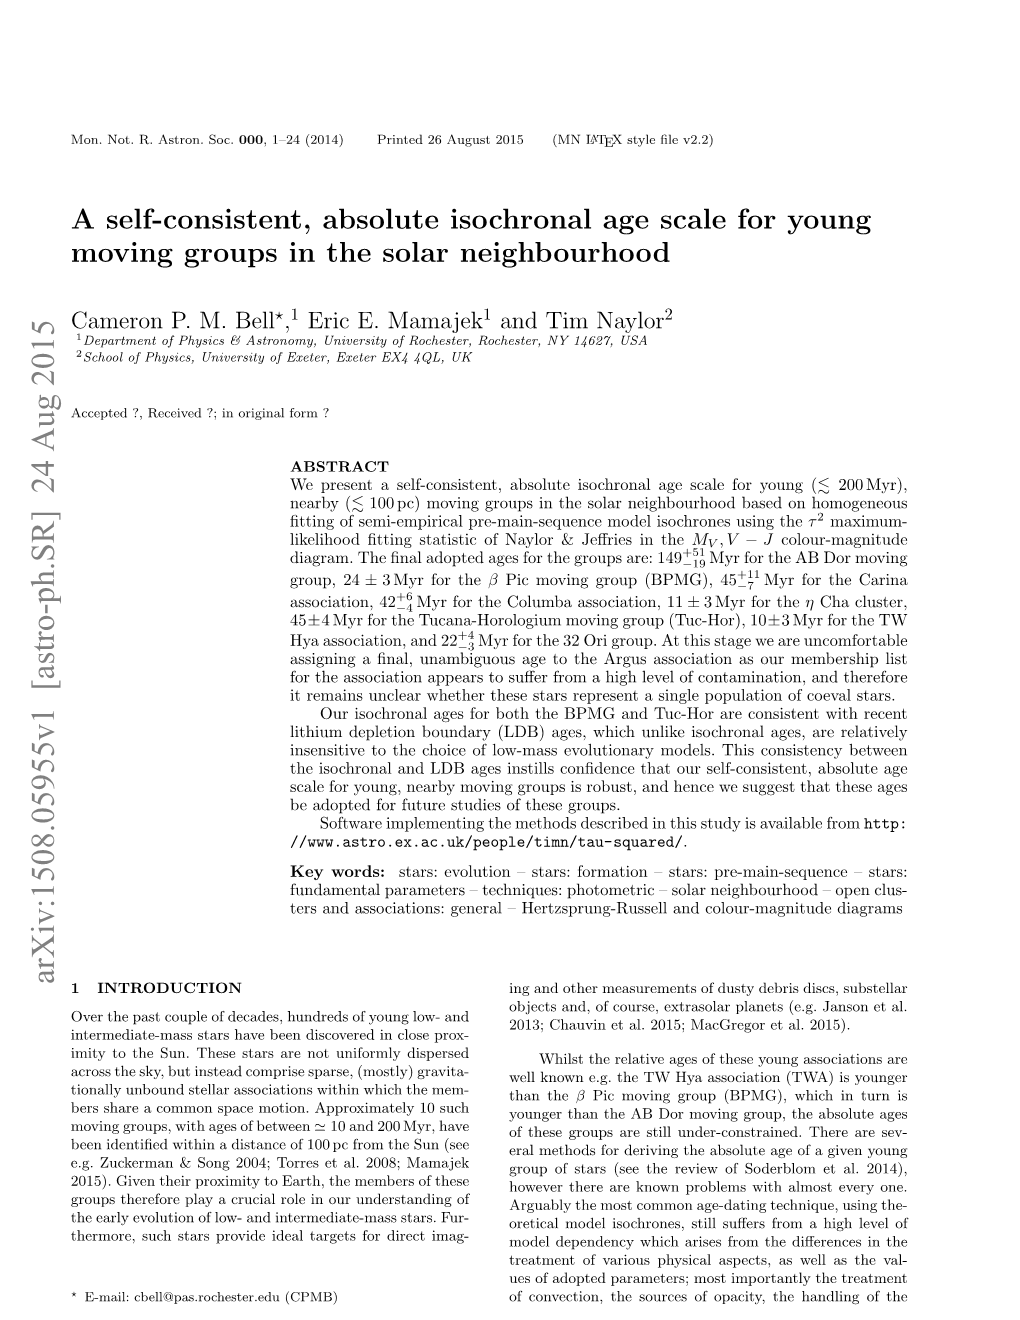 A Self-Consistent, Absolute Isochronal Age Scale for Young Moving Groups in the Solar Neighbourhood